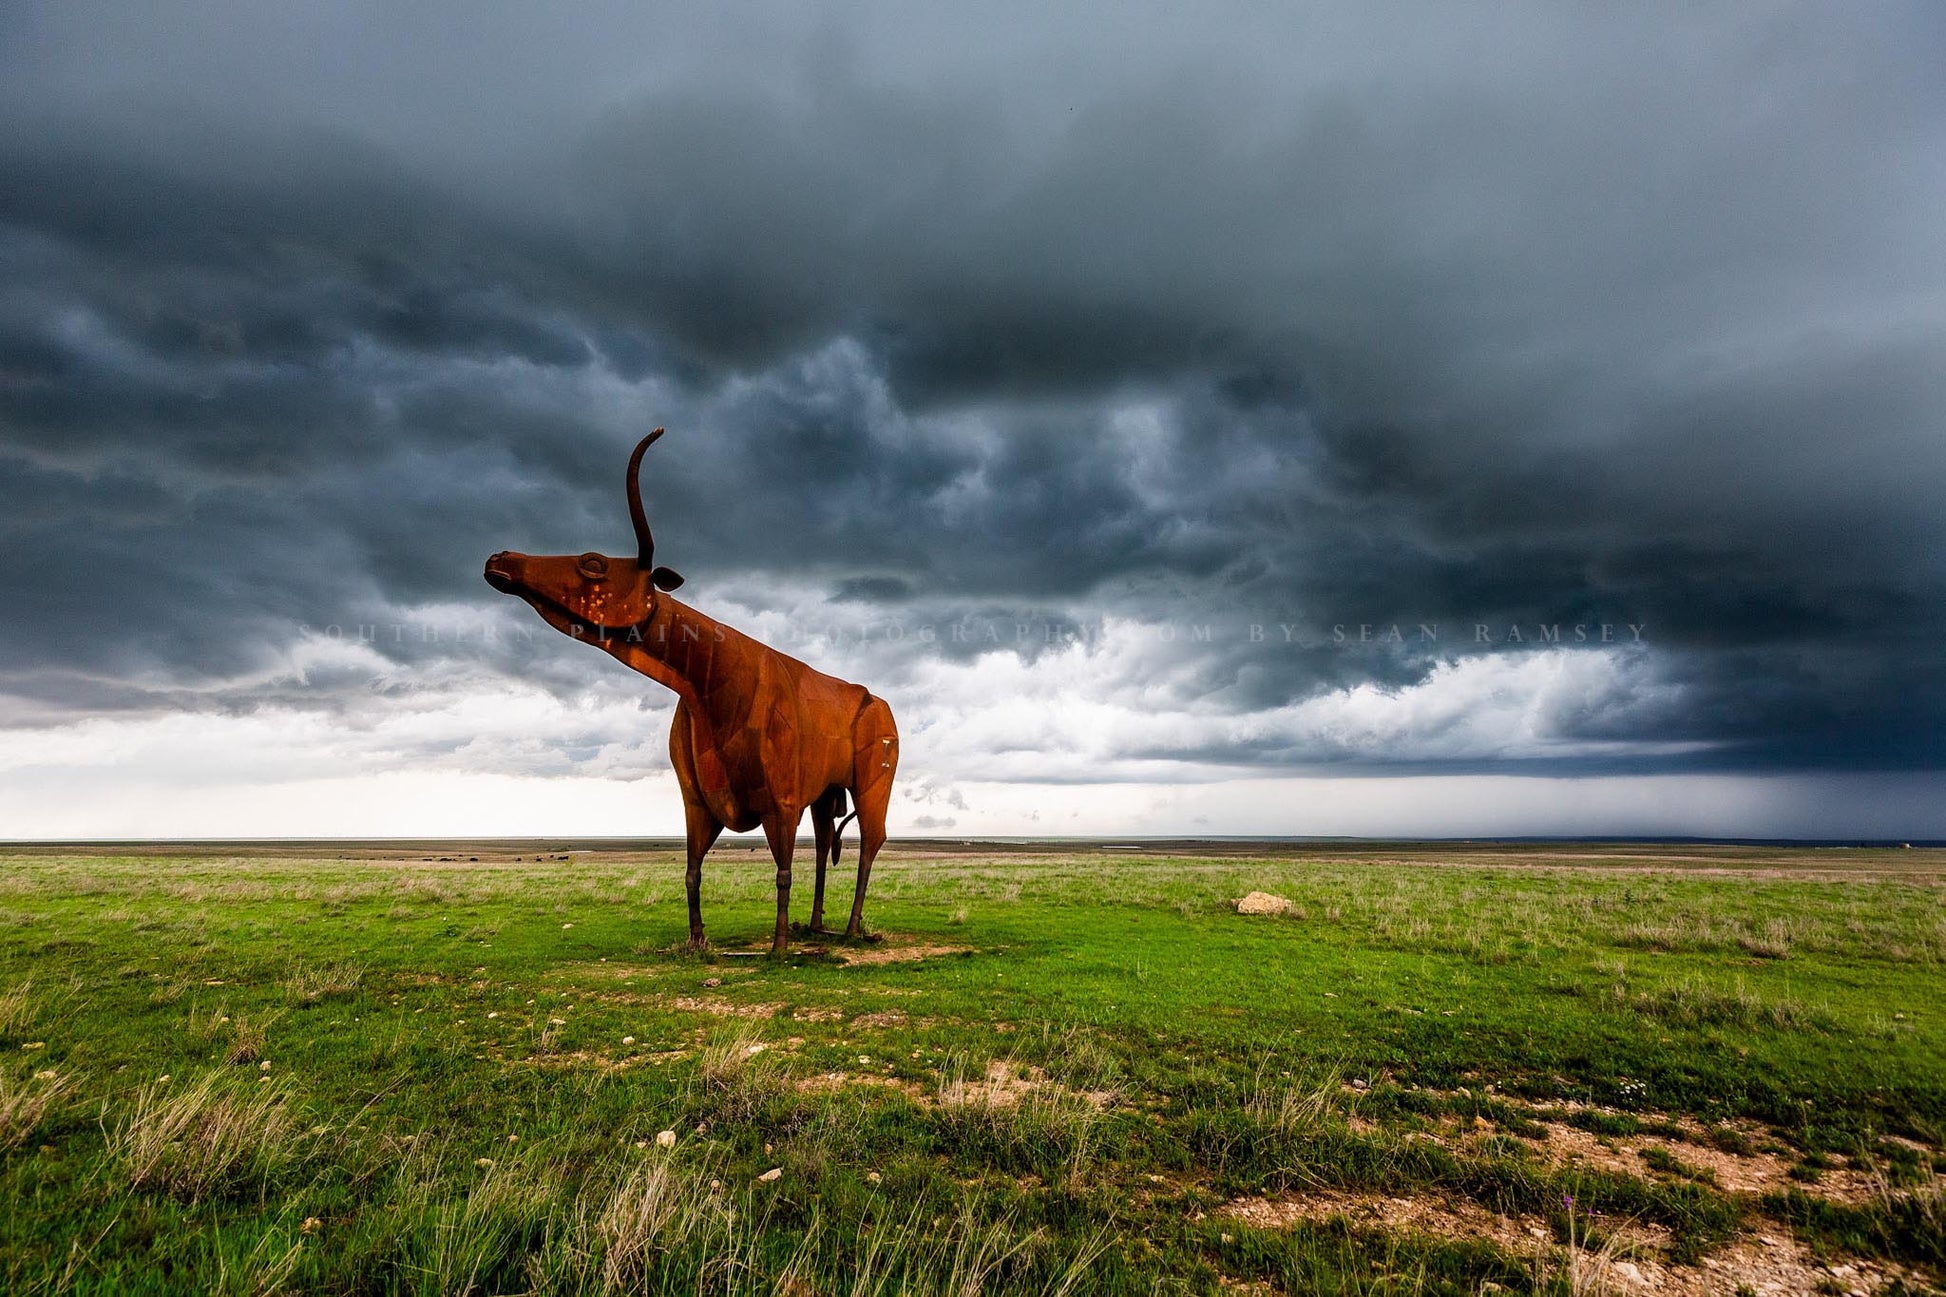 Western photography print of a steel longhorn statue towering over the plains on a stormy spring day in Texas by Sean Ramsey of Southern Plains Photography.